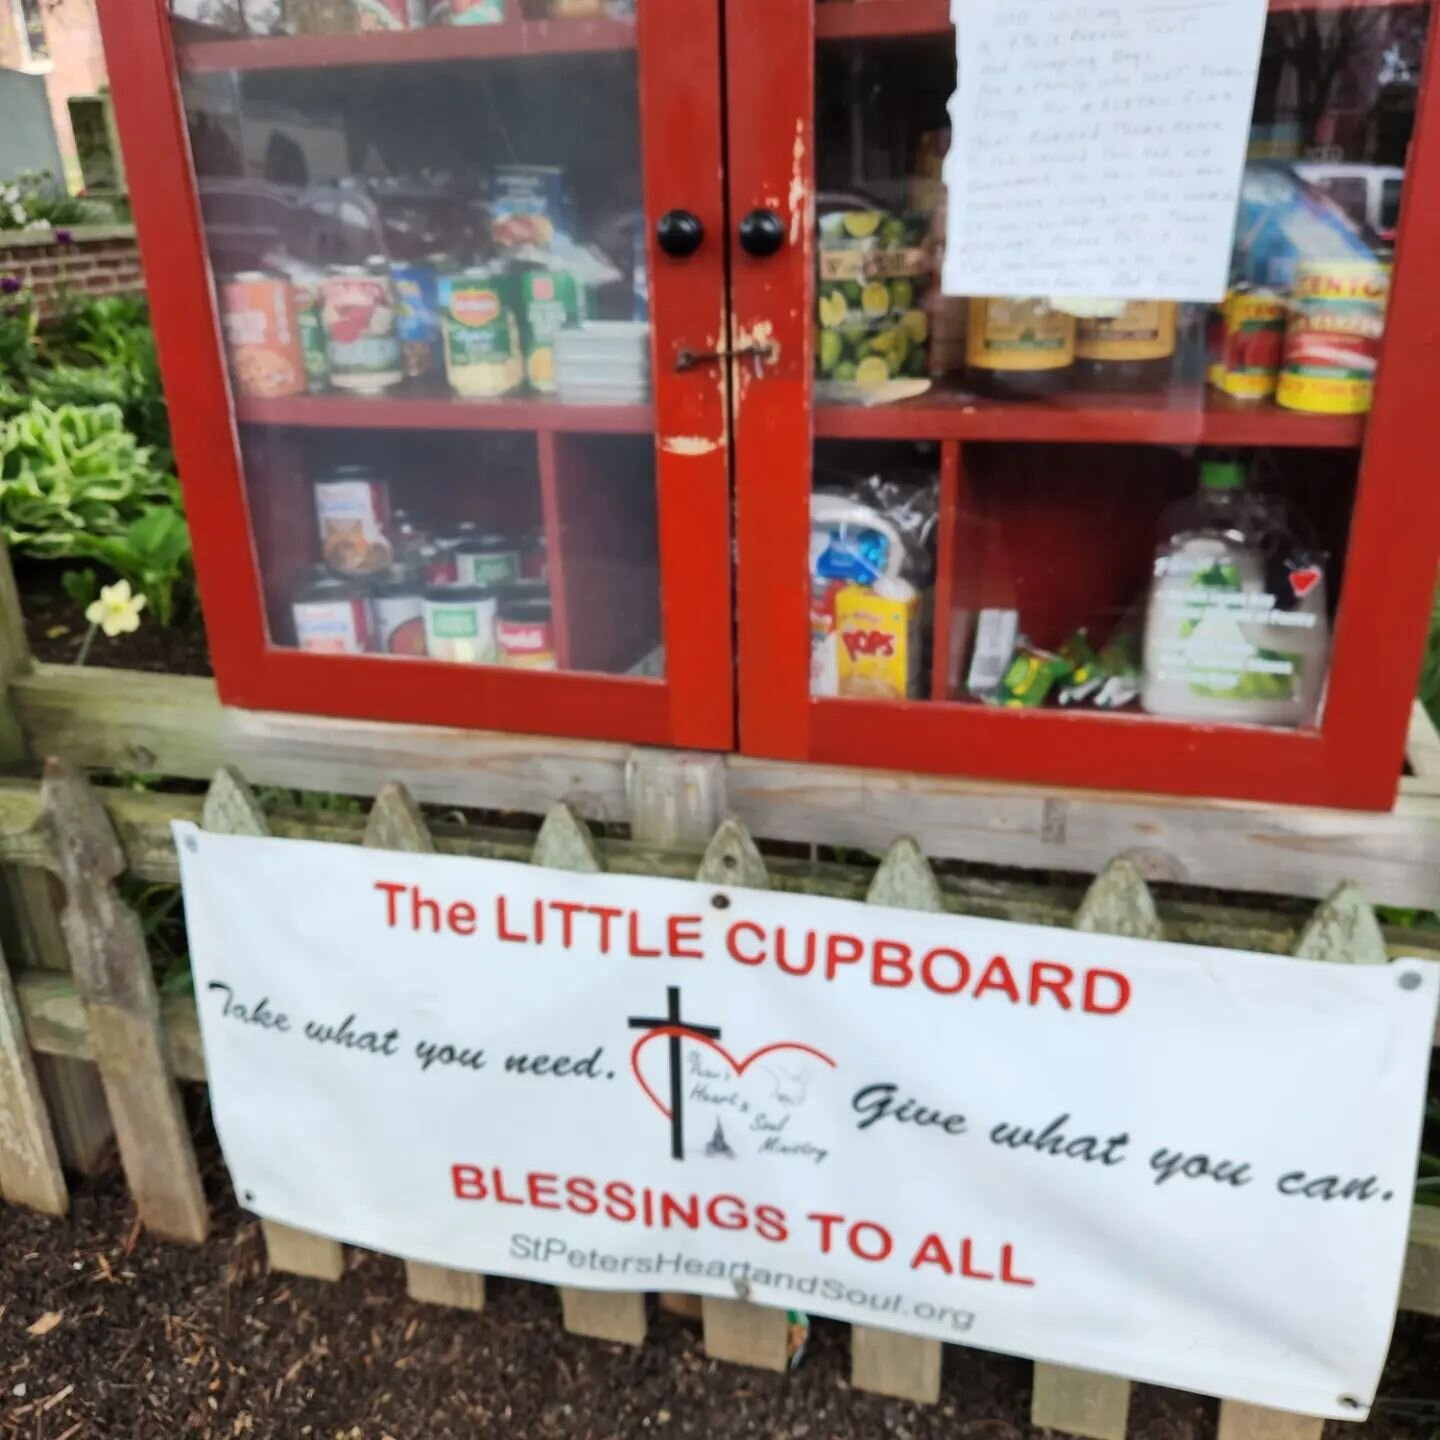 Saw this adorable little cupboard on our adventures in Lewes DE and had to go to the car and grab a couple travel bags to contribute. There should be more of these all over such a lovely idea. 💙🥄🥛💚